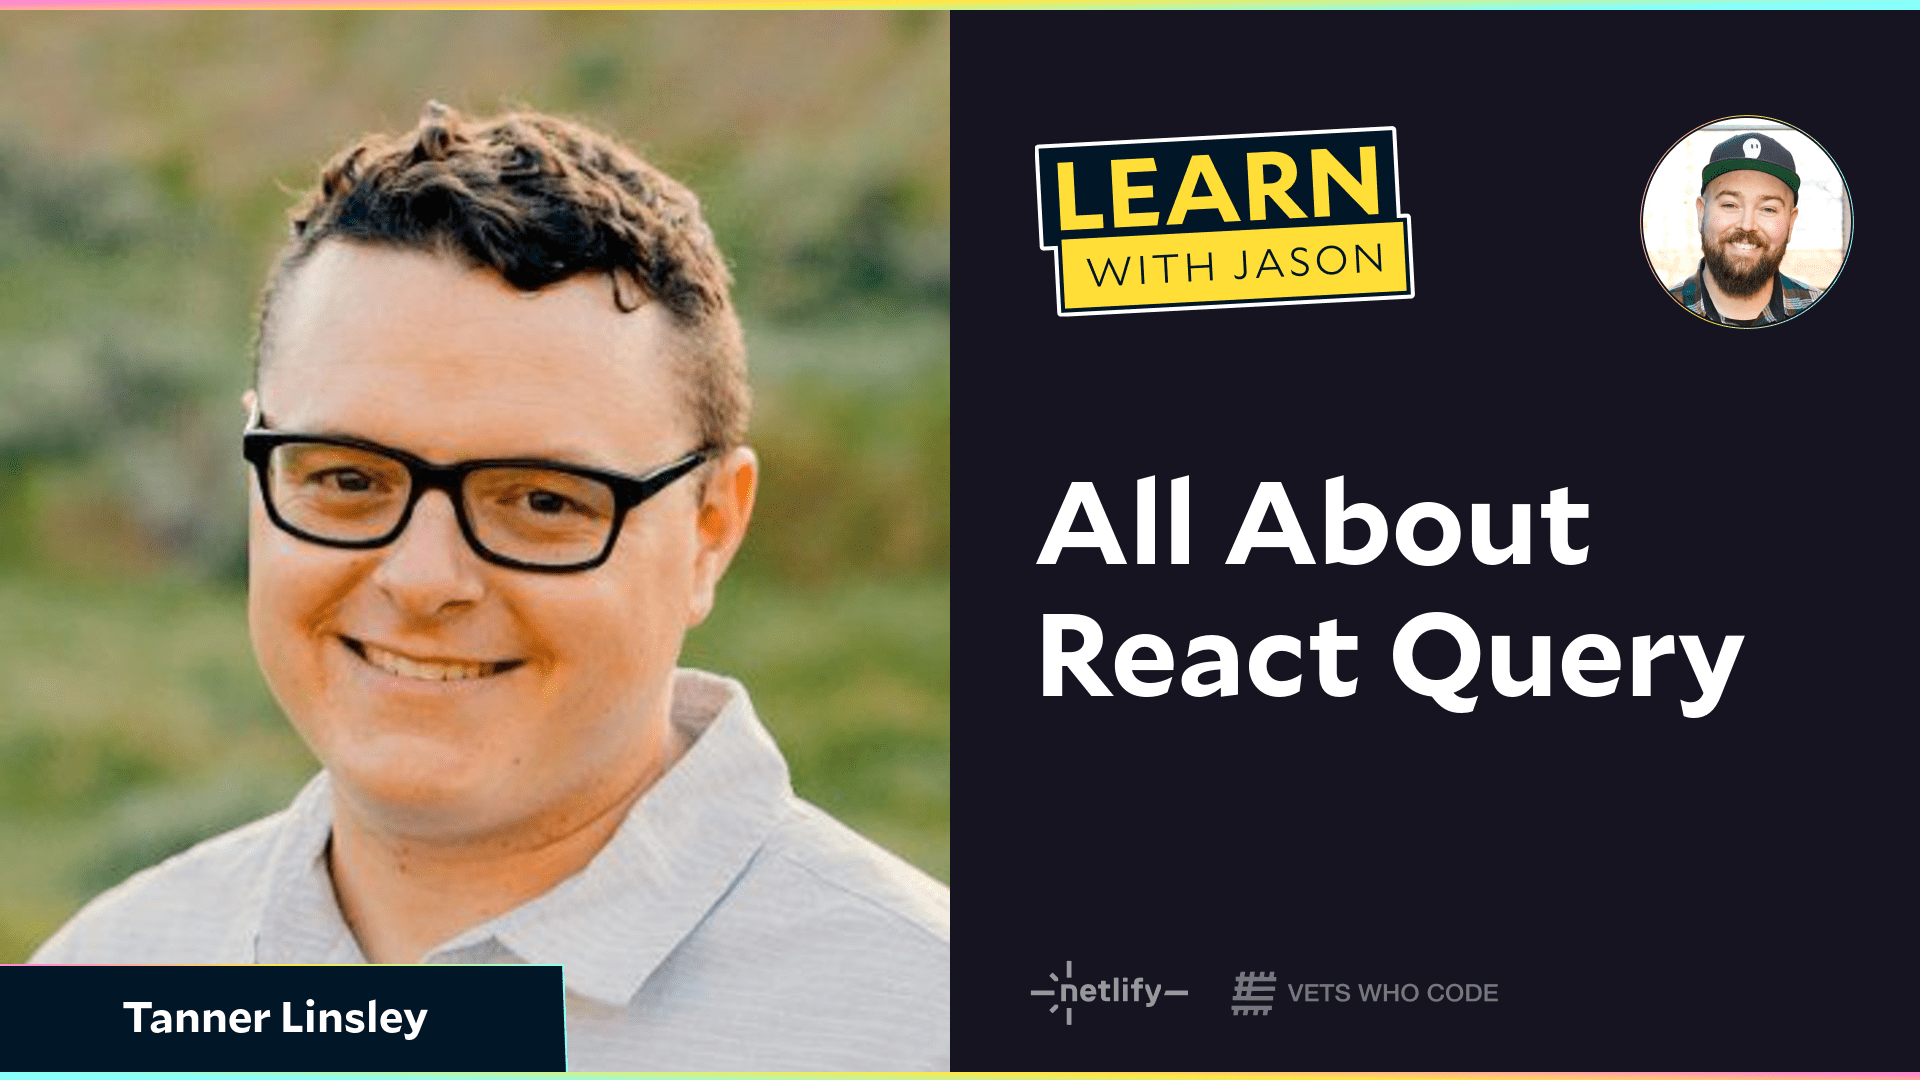 All About React Query  (with Tanner Linsley)